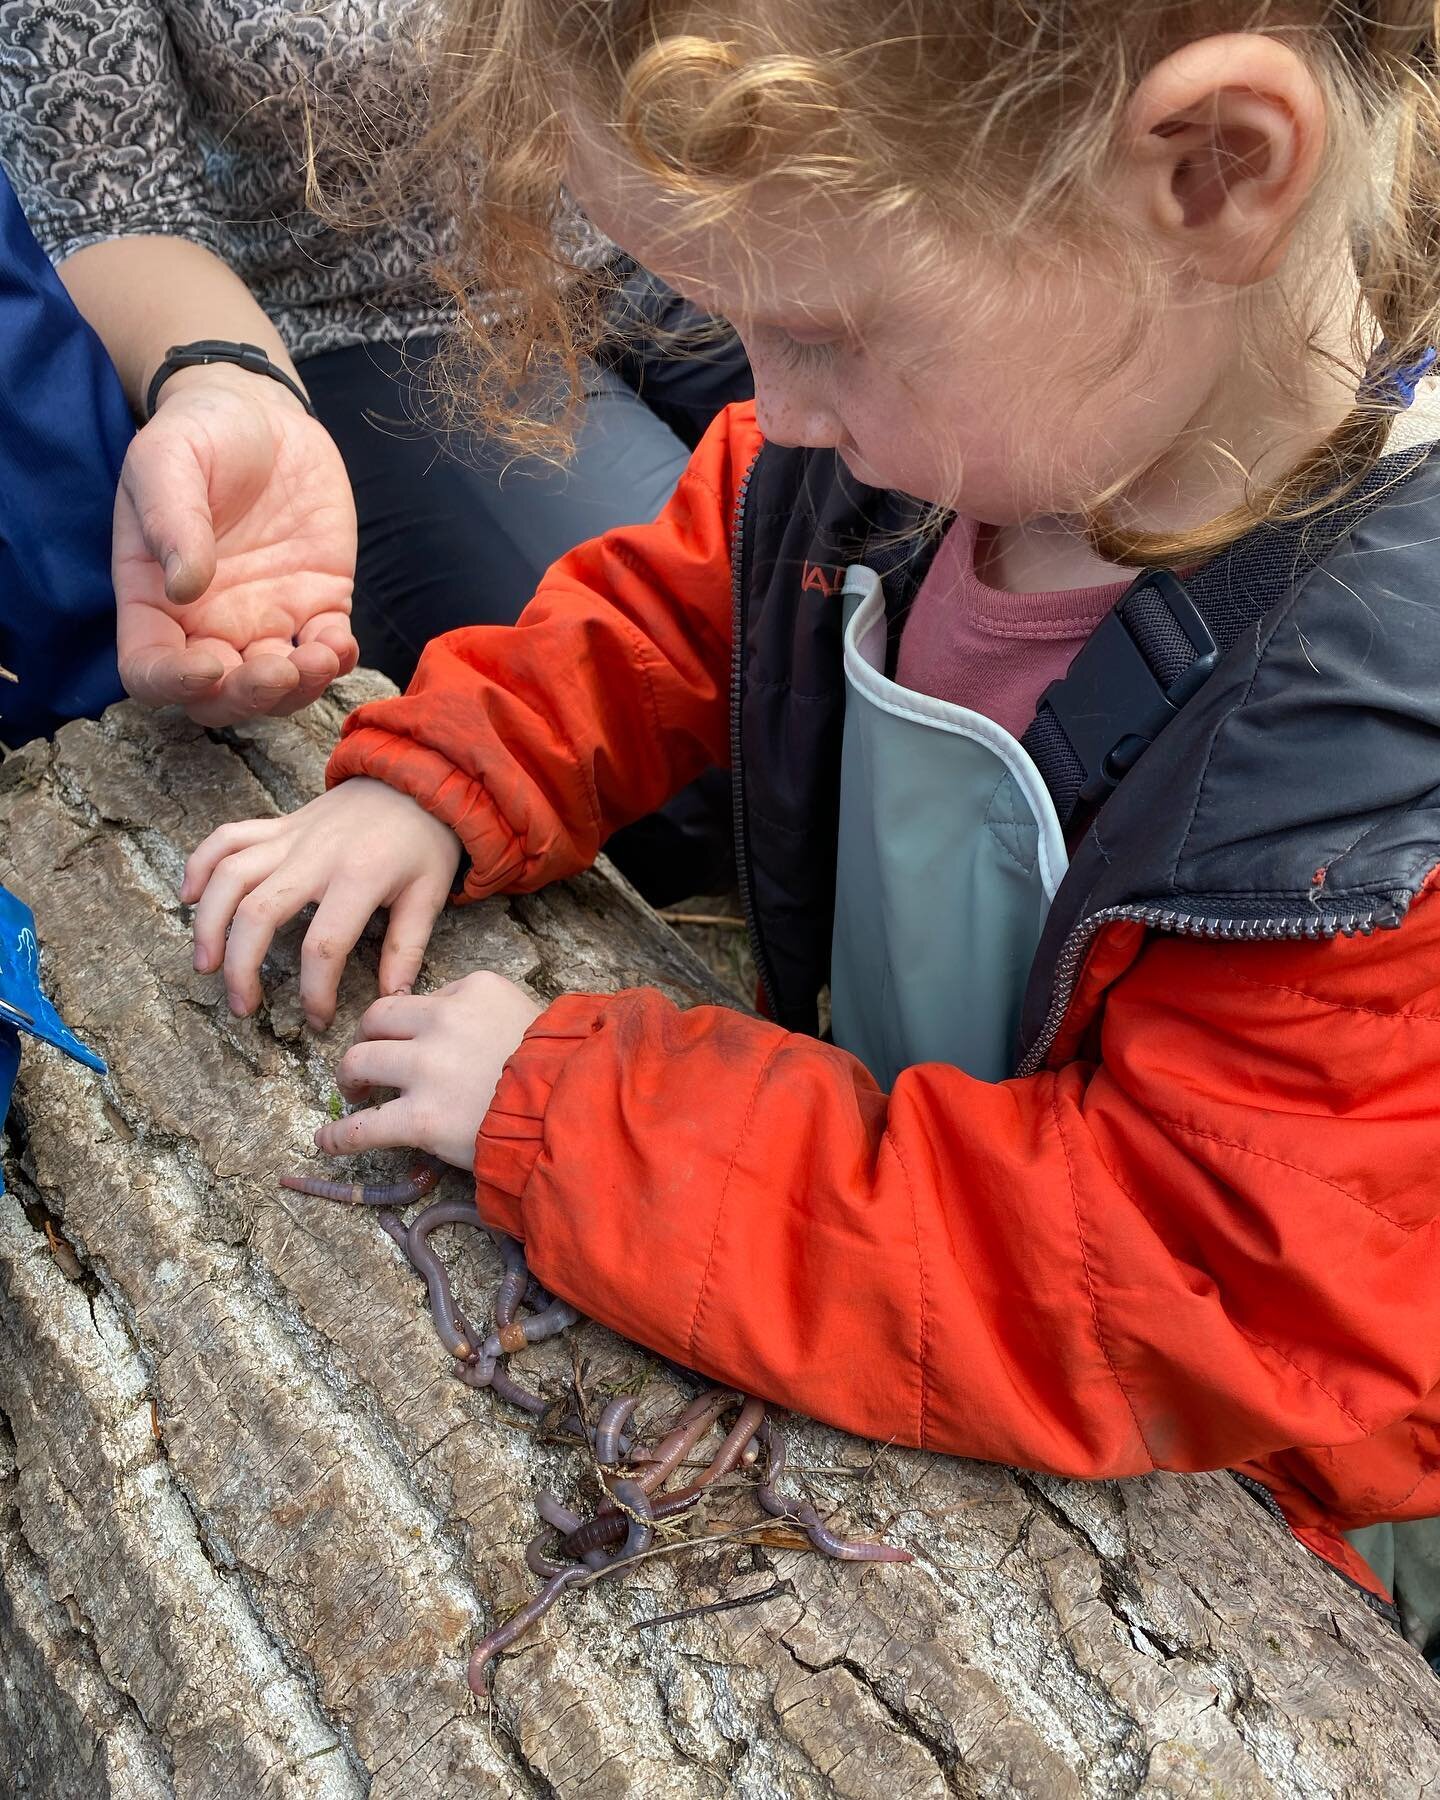 Spring is here! The children @rowantreeptbo love to look for worms under logs and rocks 🪱 They like to count how many they can find and hold in their hands at one time.
.
.
.
#naturekindergarten #rowantreechildrensschool #forestschool